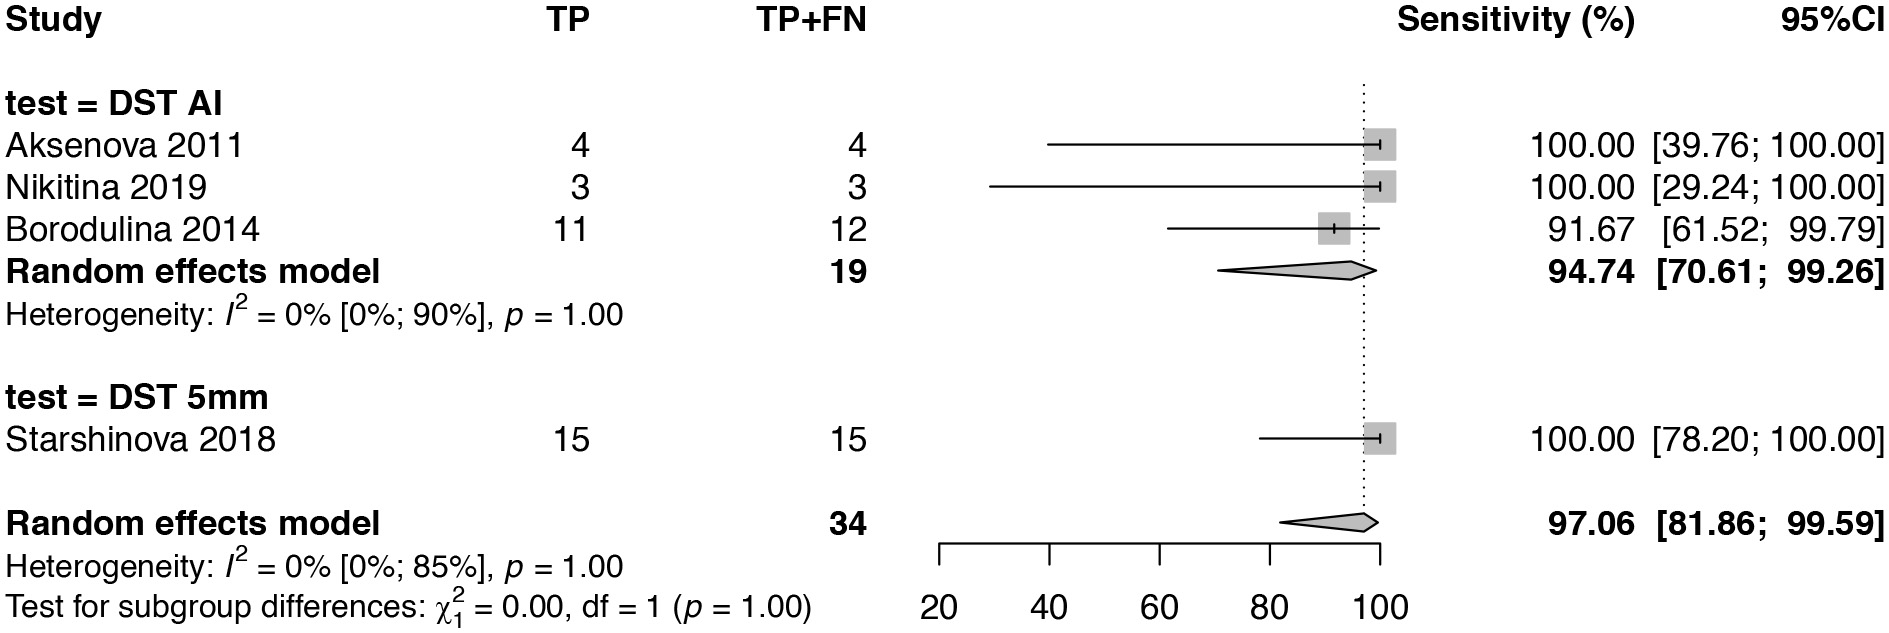 Fig. 4. Sensitivity of TBSTs in children and adolescents